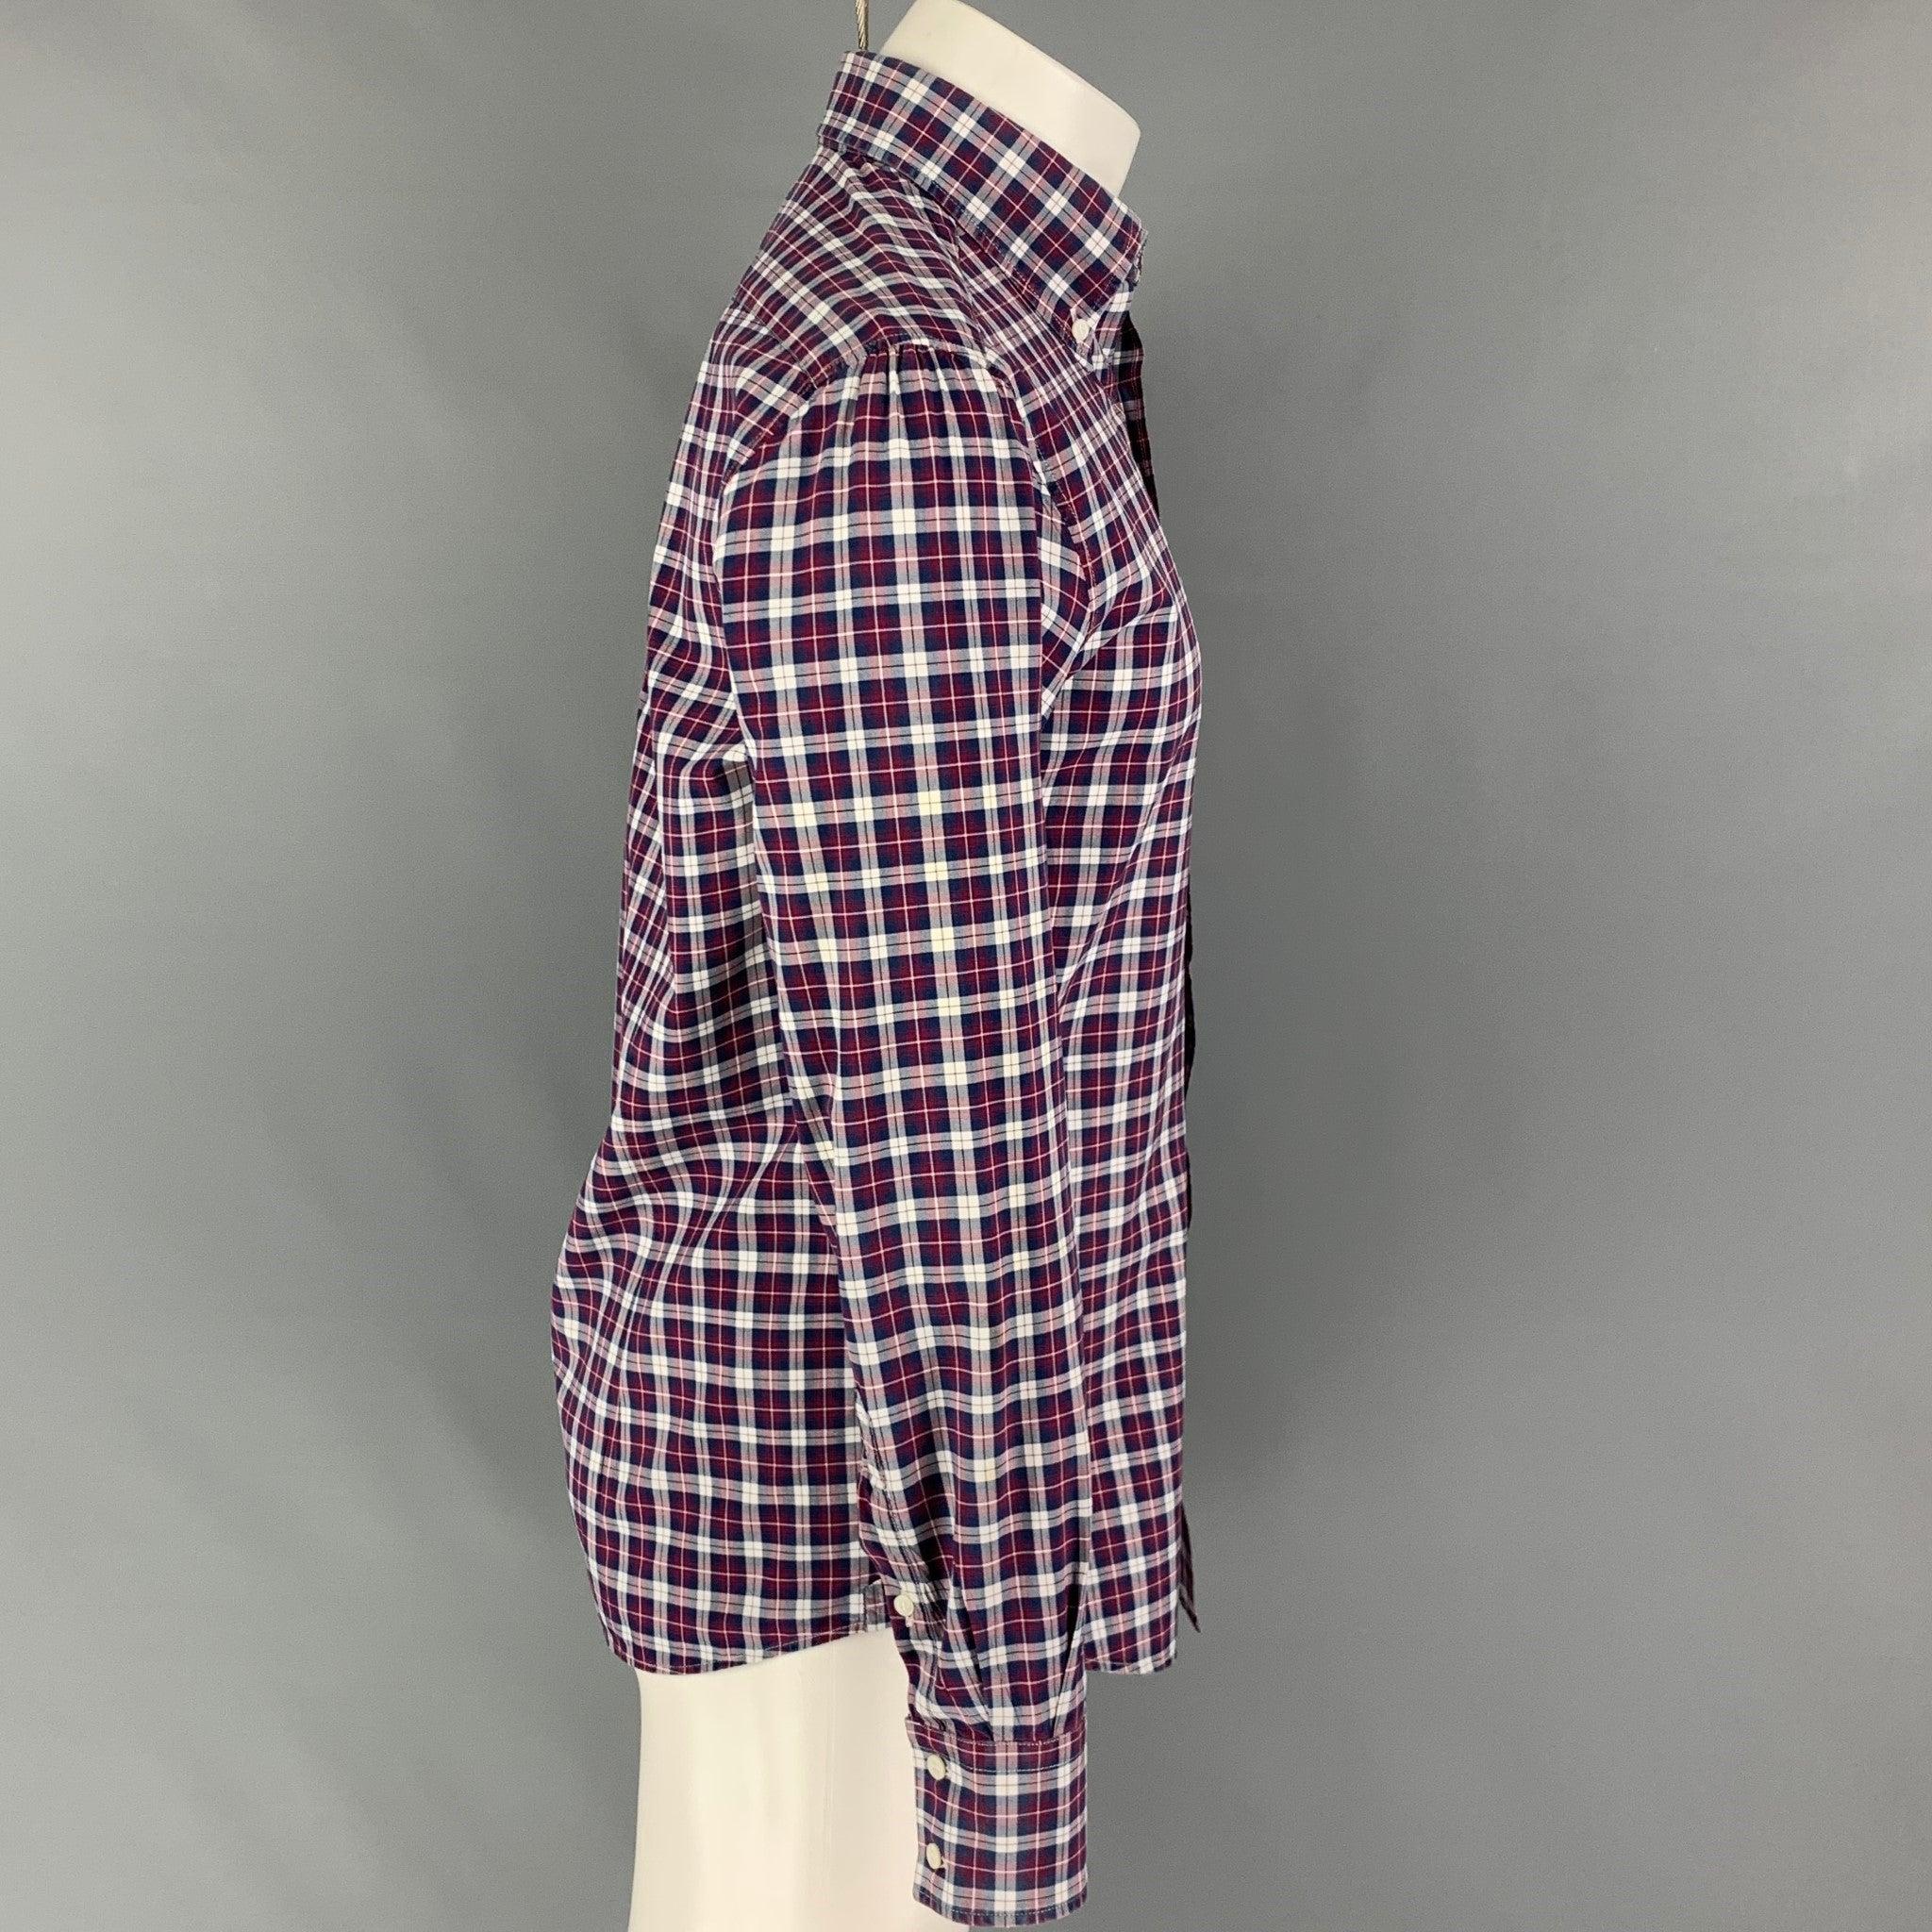 BRUNELLO CUCINELLI long sleeve shirt comes in a navy & burgundy plaid cotton featuring a slim fit, button down collar, and a button up closure. Made in Italy.
Very Good Pre-Owned Condition. Item has been altered at both shoulder seam. Please see